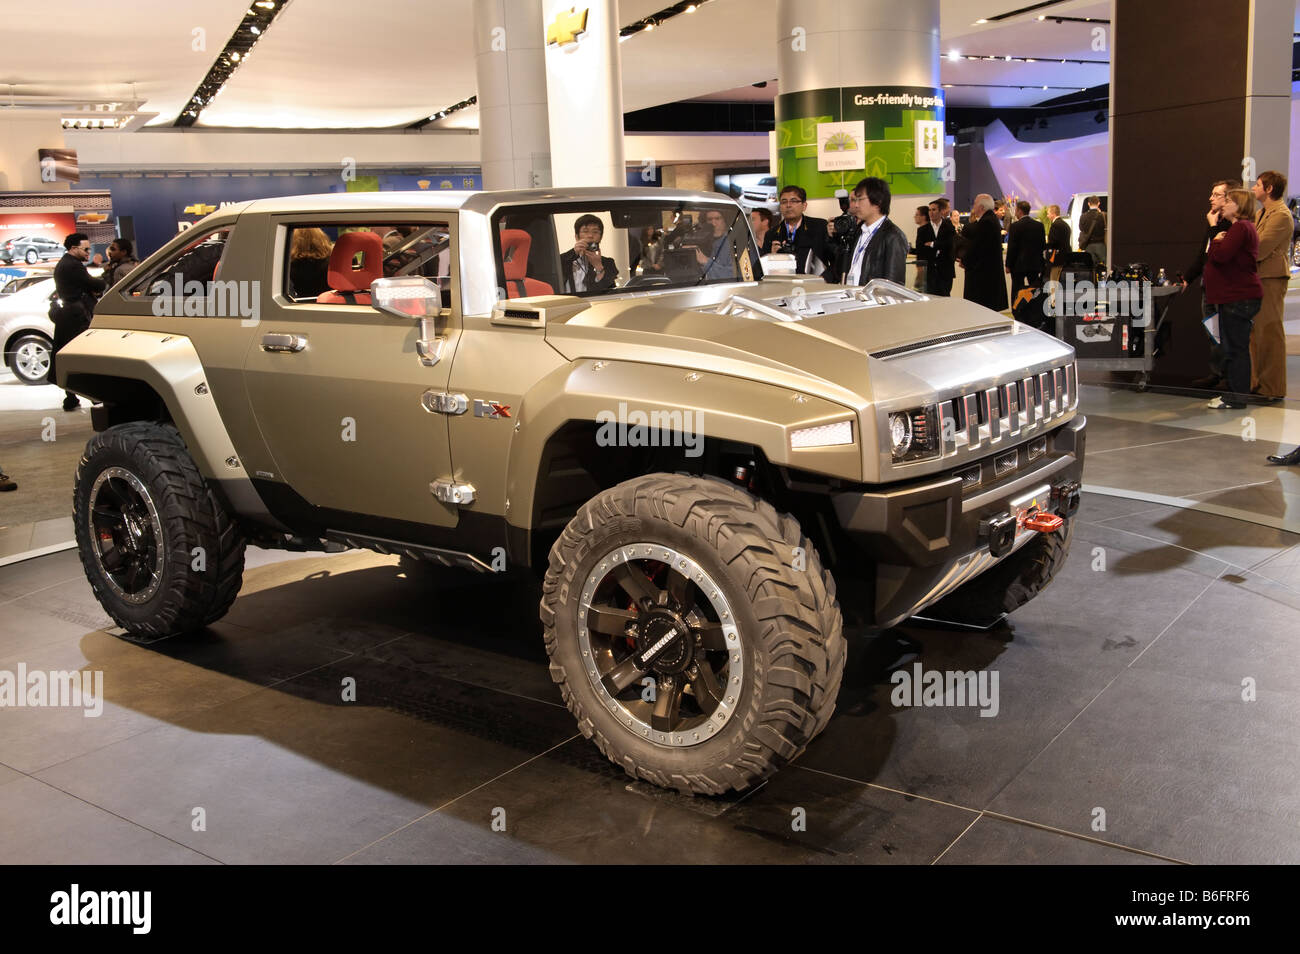 Hummer HX concept vehicle at the 2008 North American International Auto Show in Detroit Michigan USA. Stock Photo